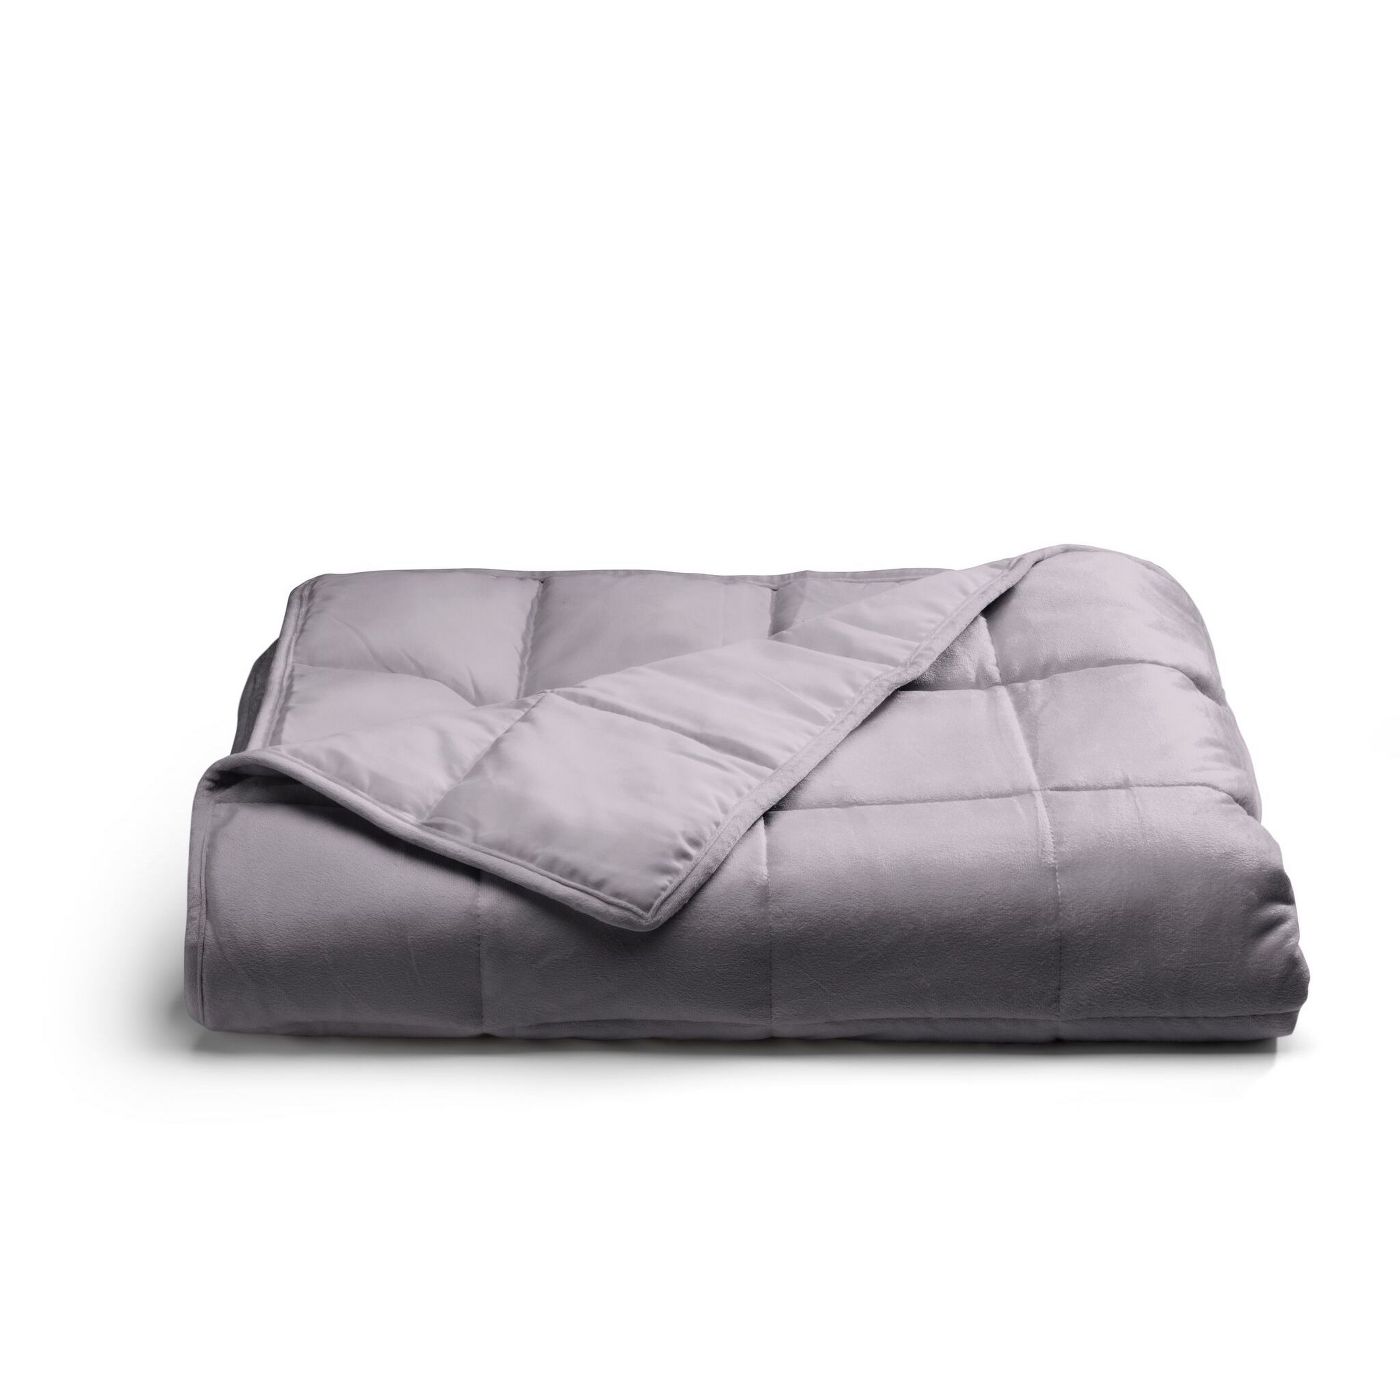 12 lbs Weighted Blanket Only $25.50 at Target